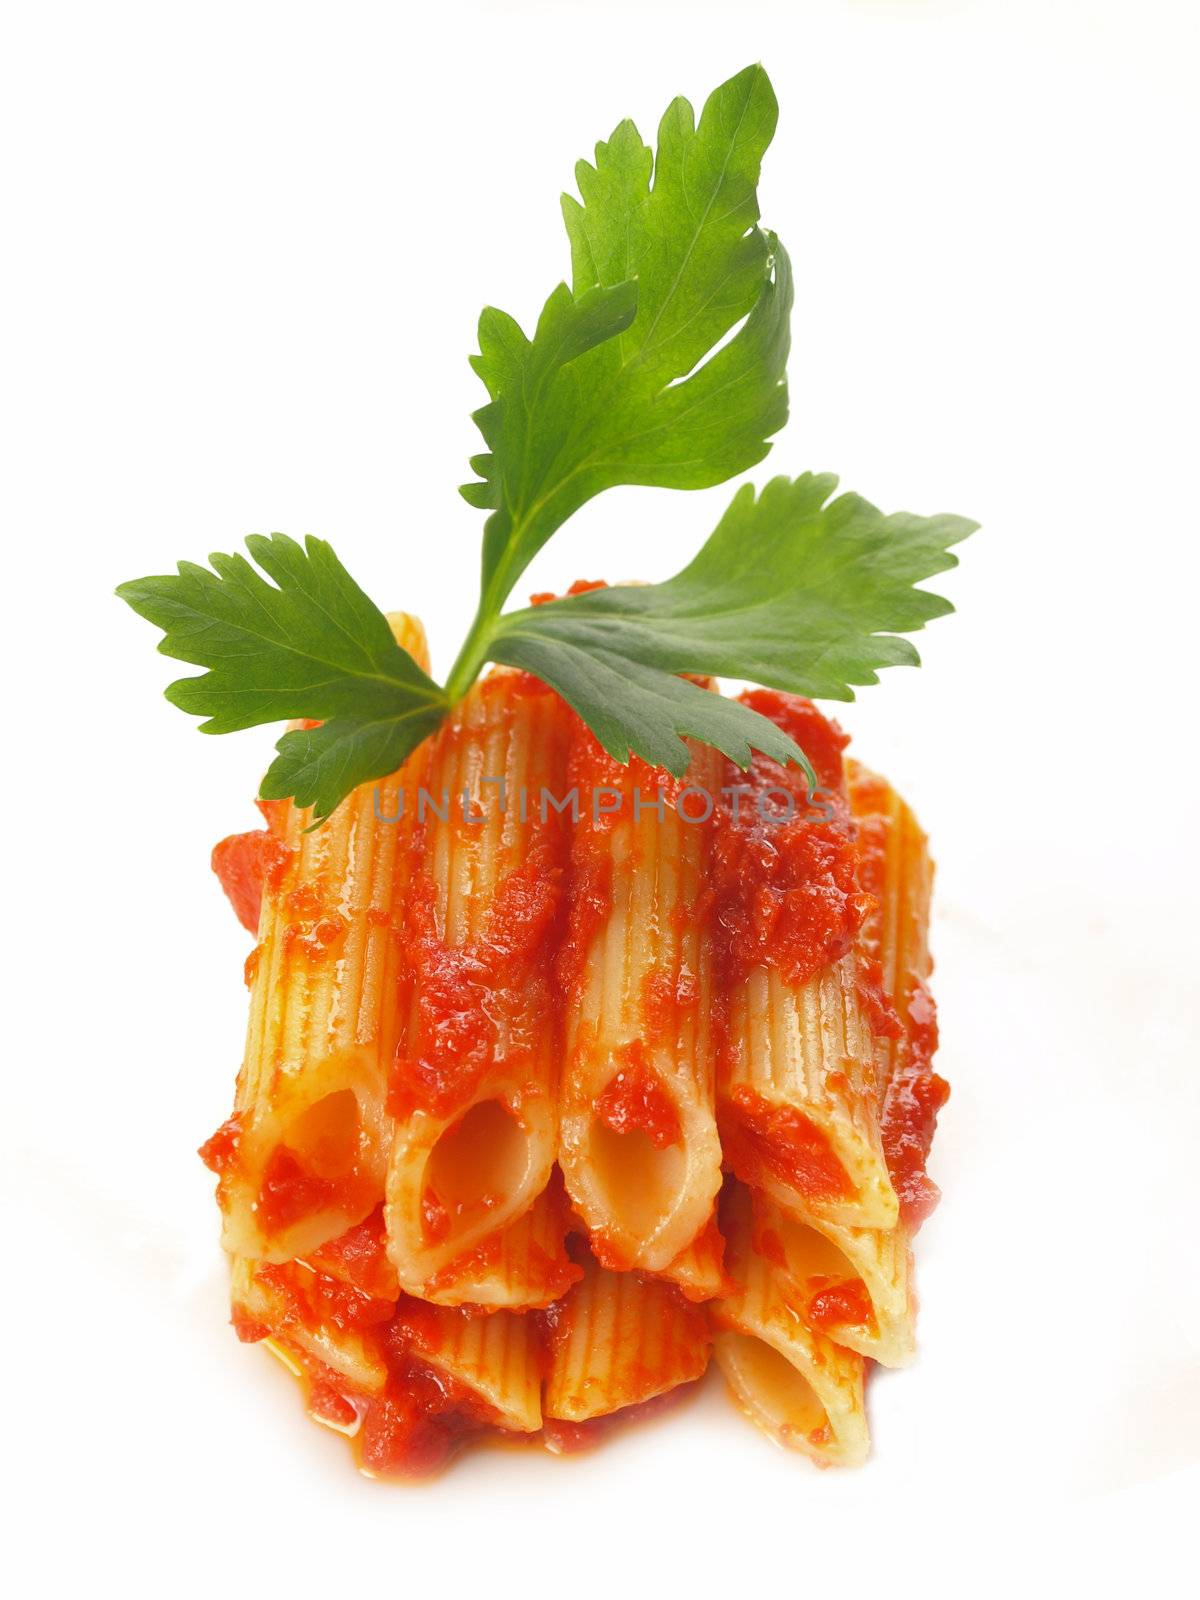 stack of penne pasta in tomato sauce by zkruger